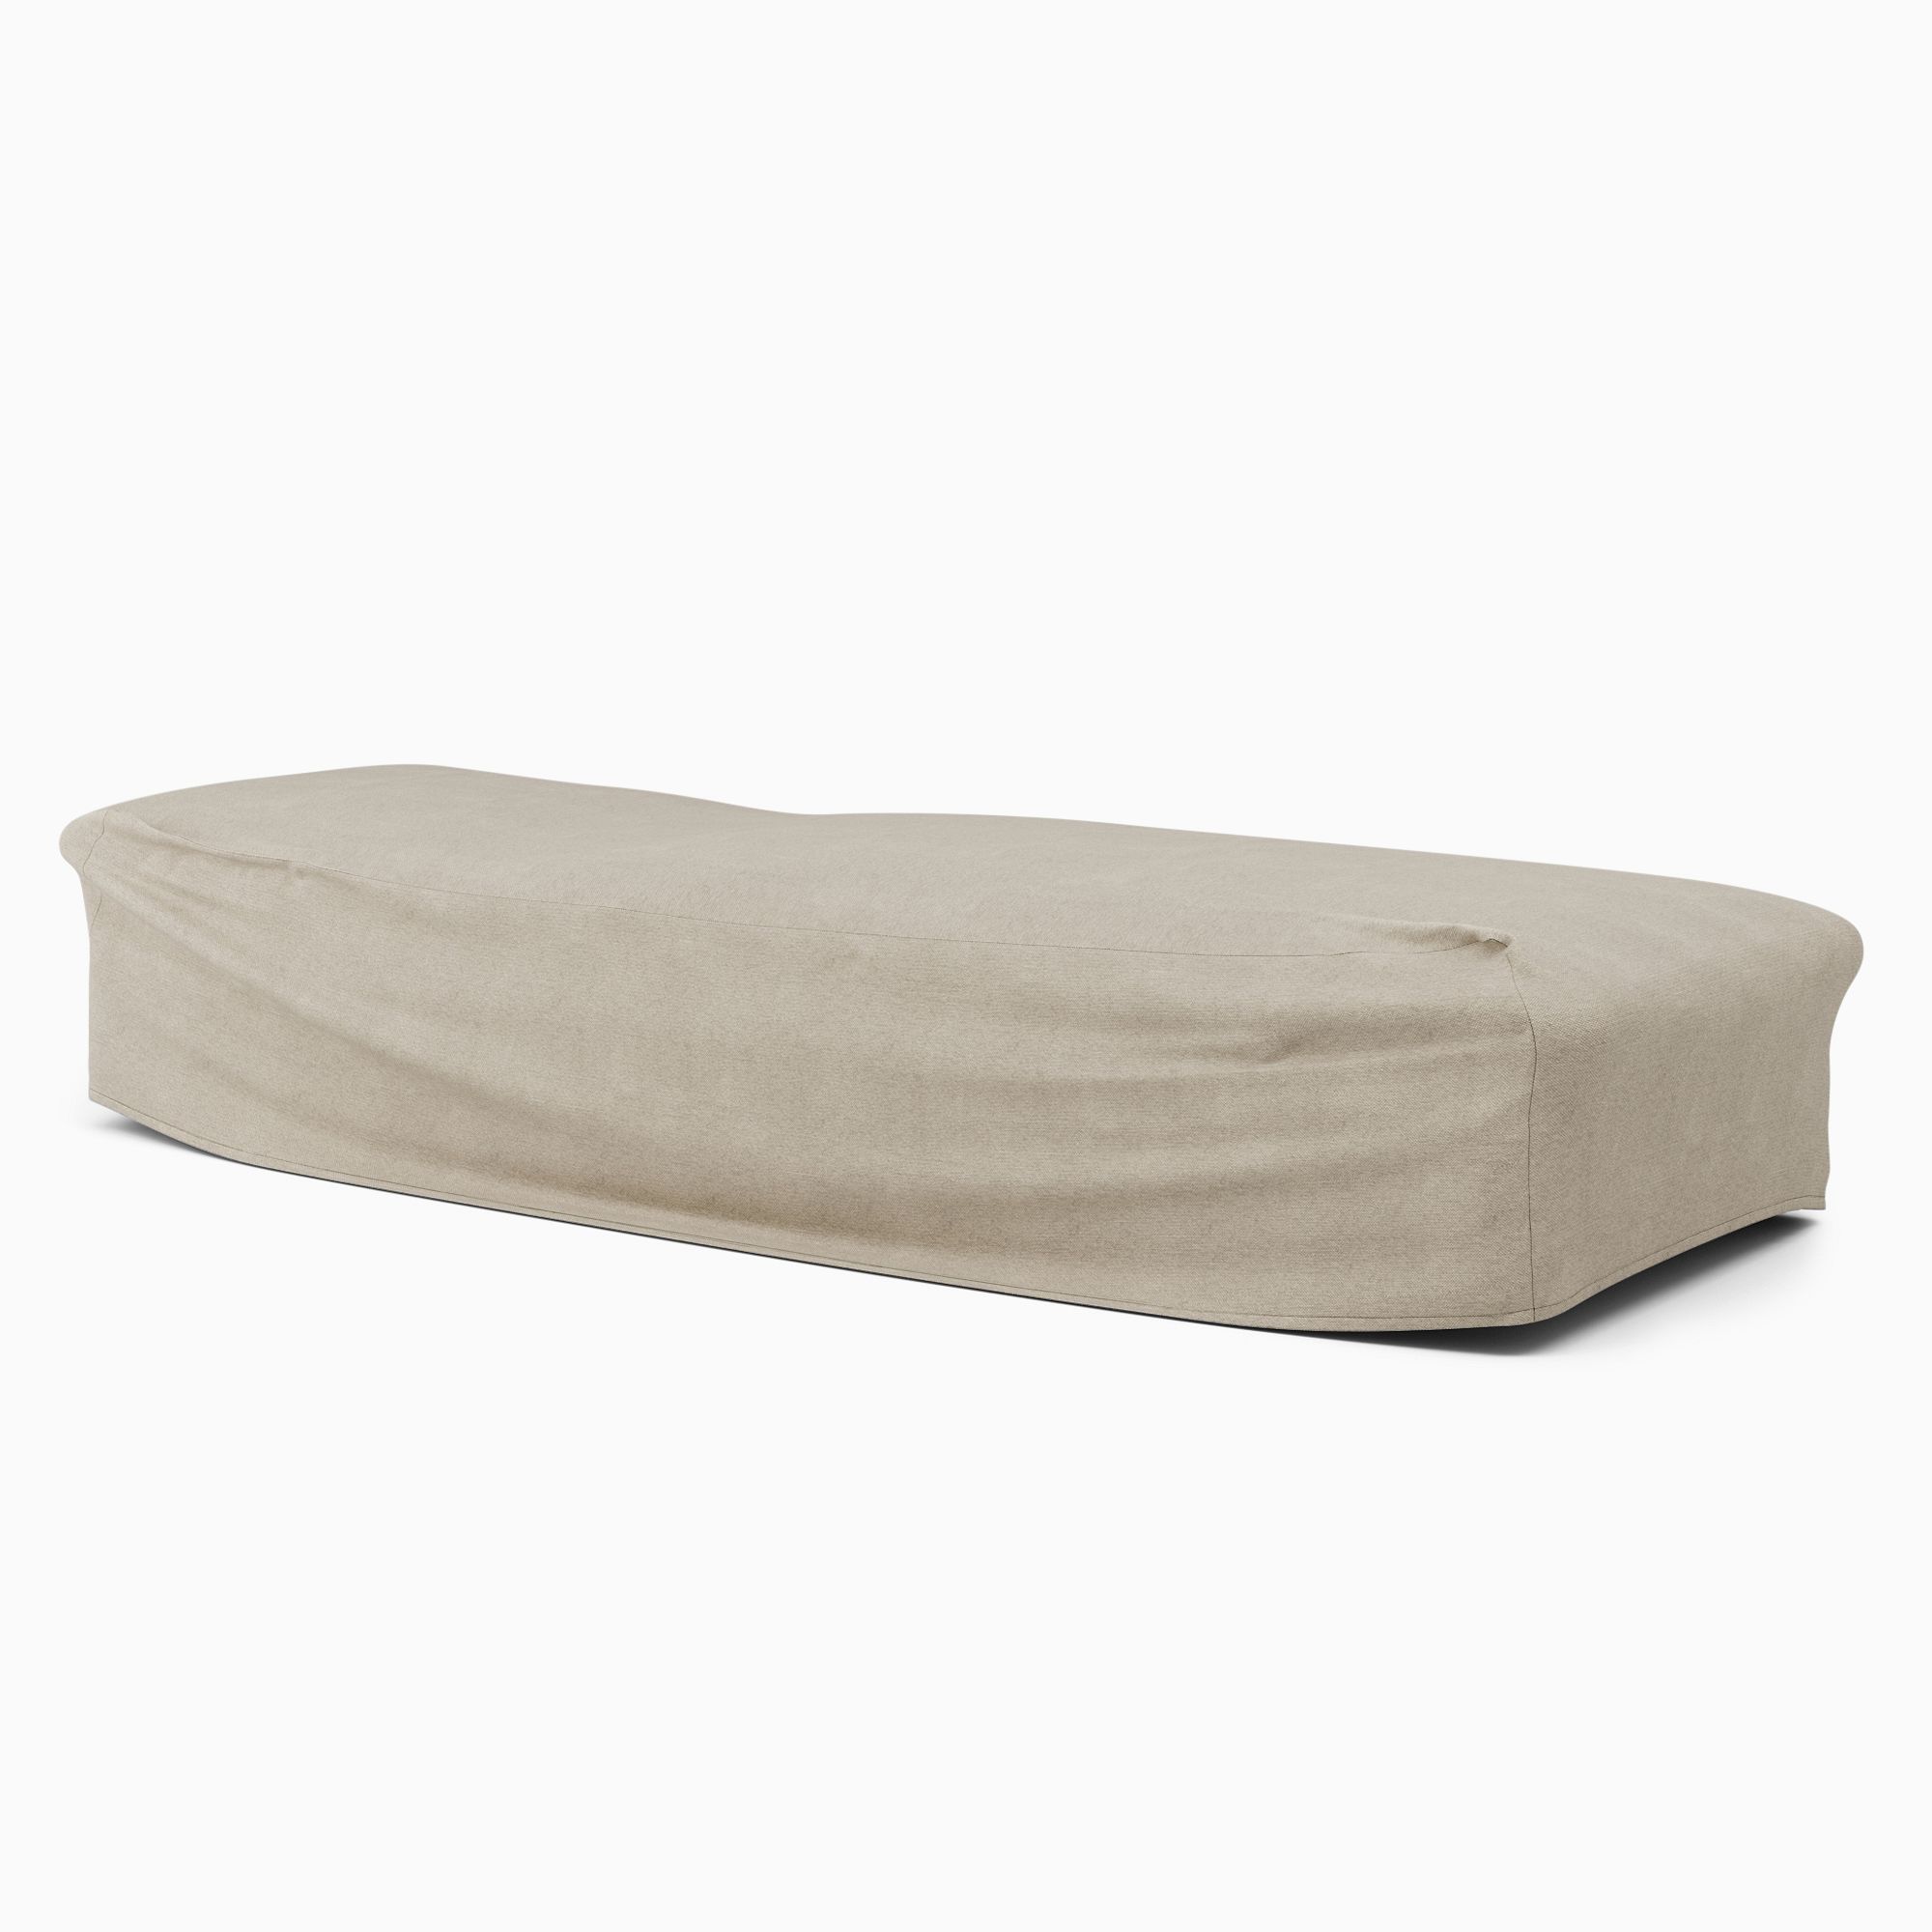 Westport Outdoor Chaise Lounge Protective Cover | West Elm